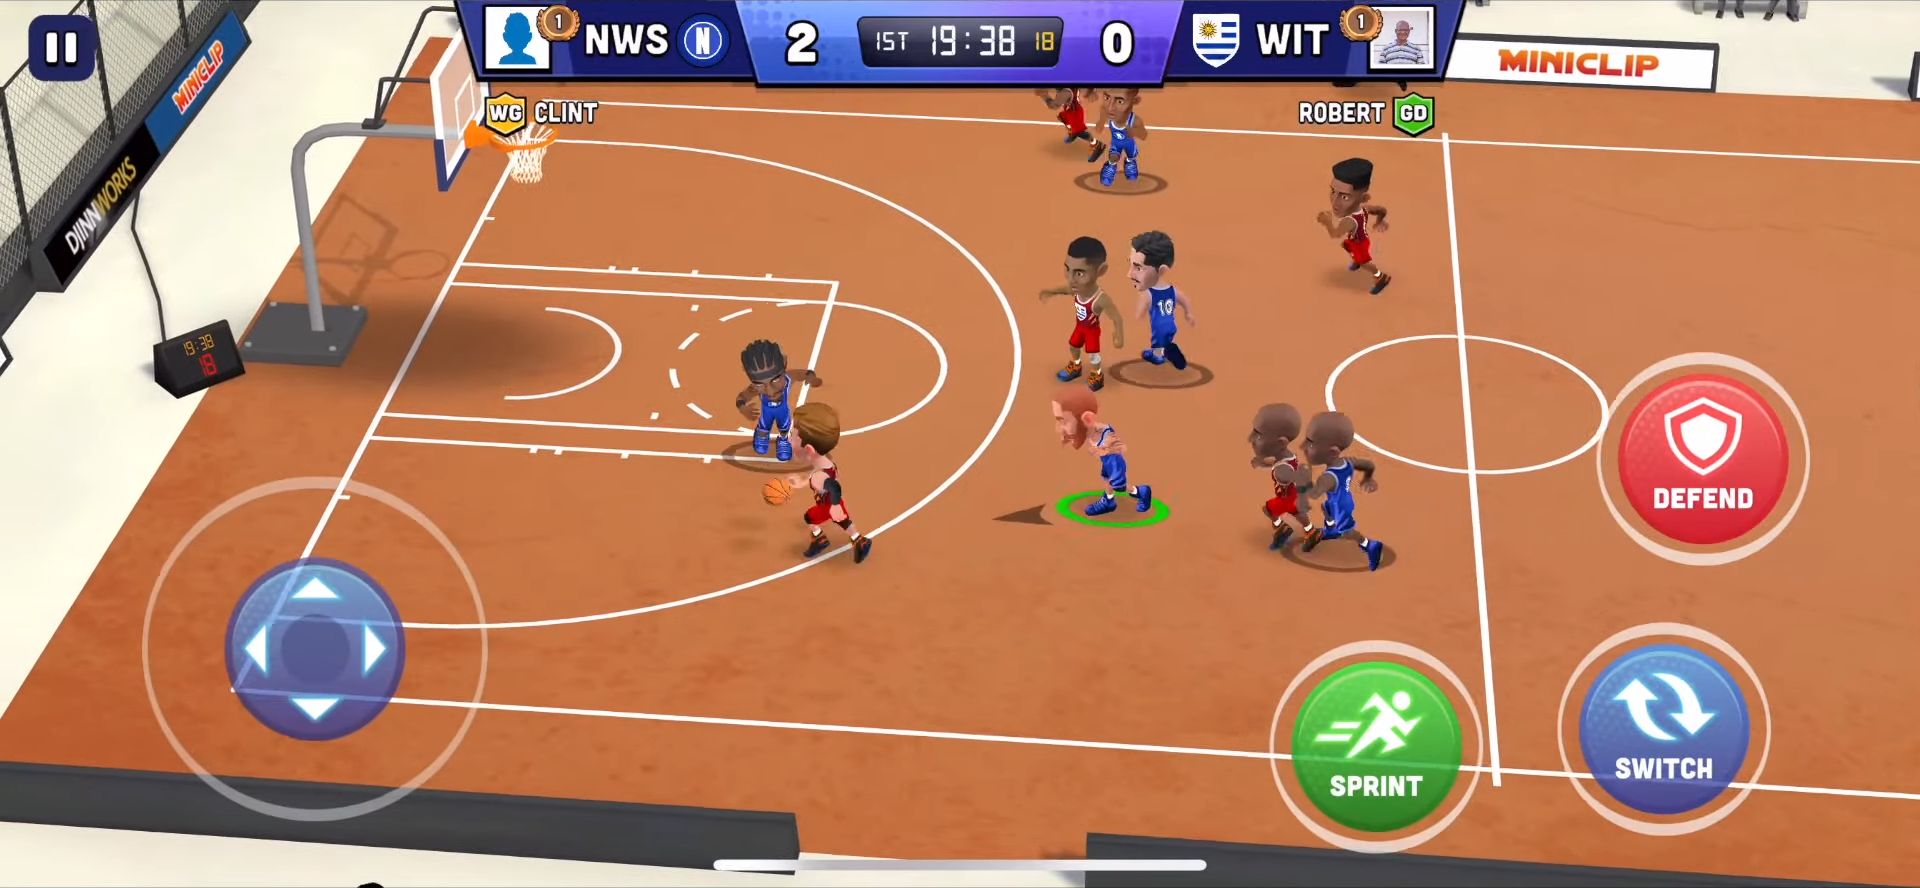 Mini Basketball for Android